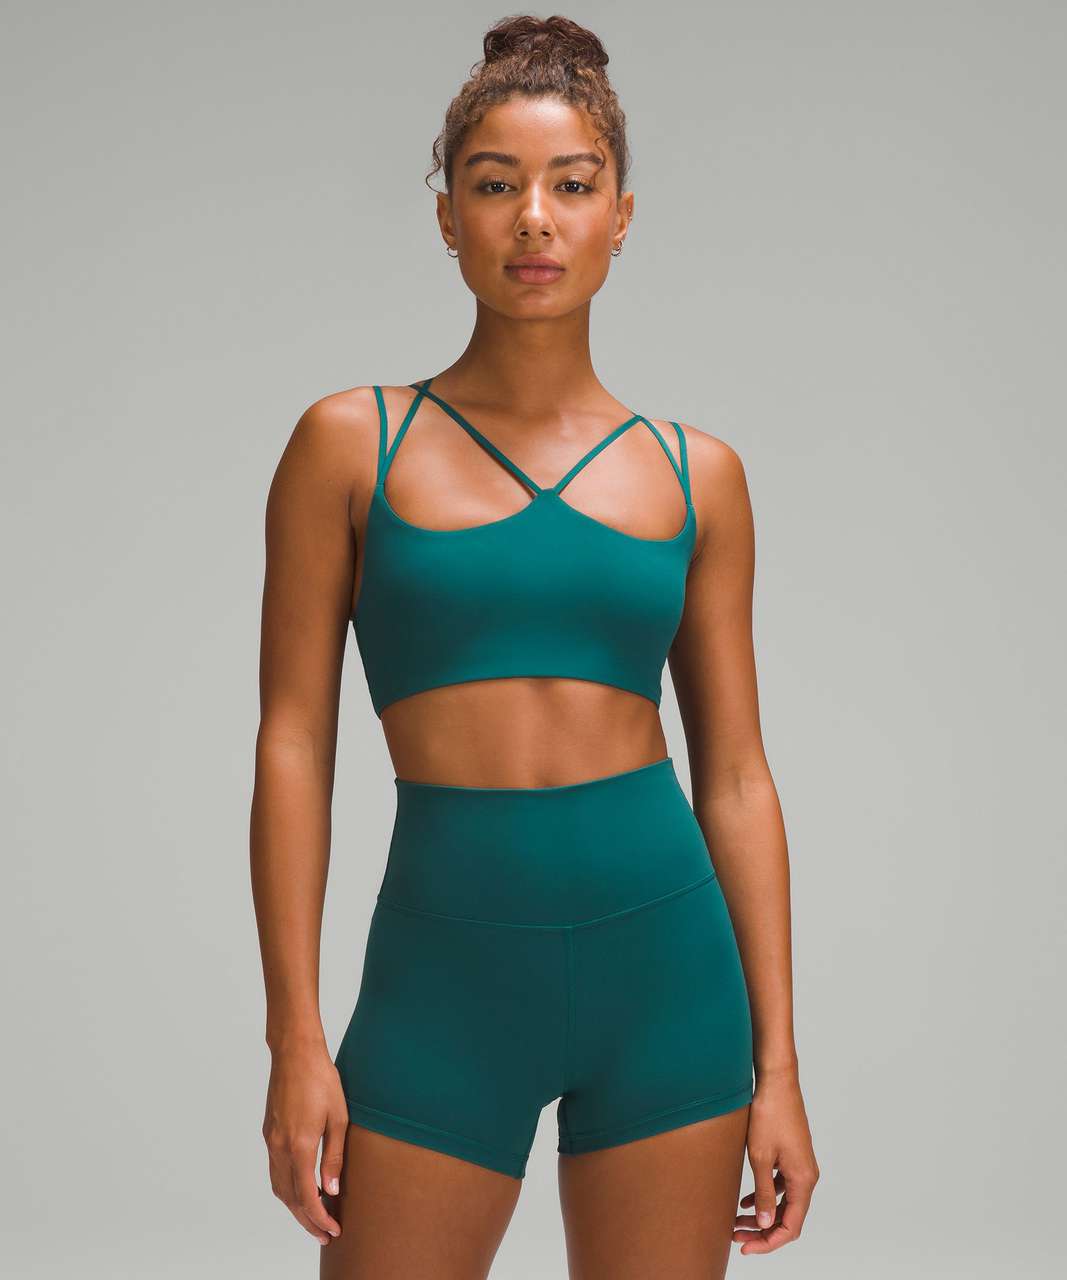 Lululemon Nulu Strappy Yoga Bra *Light Support, A/B Cup - Storm Teal